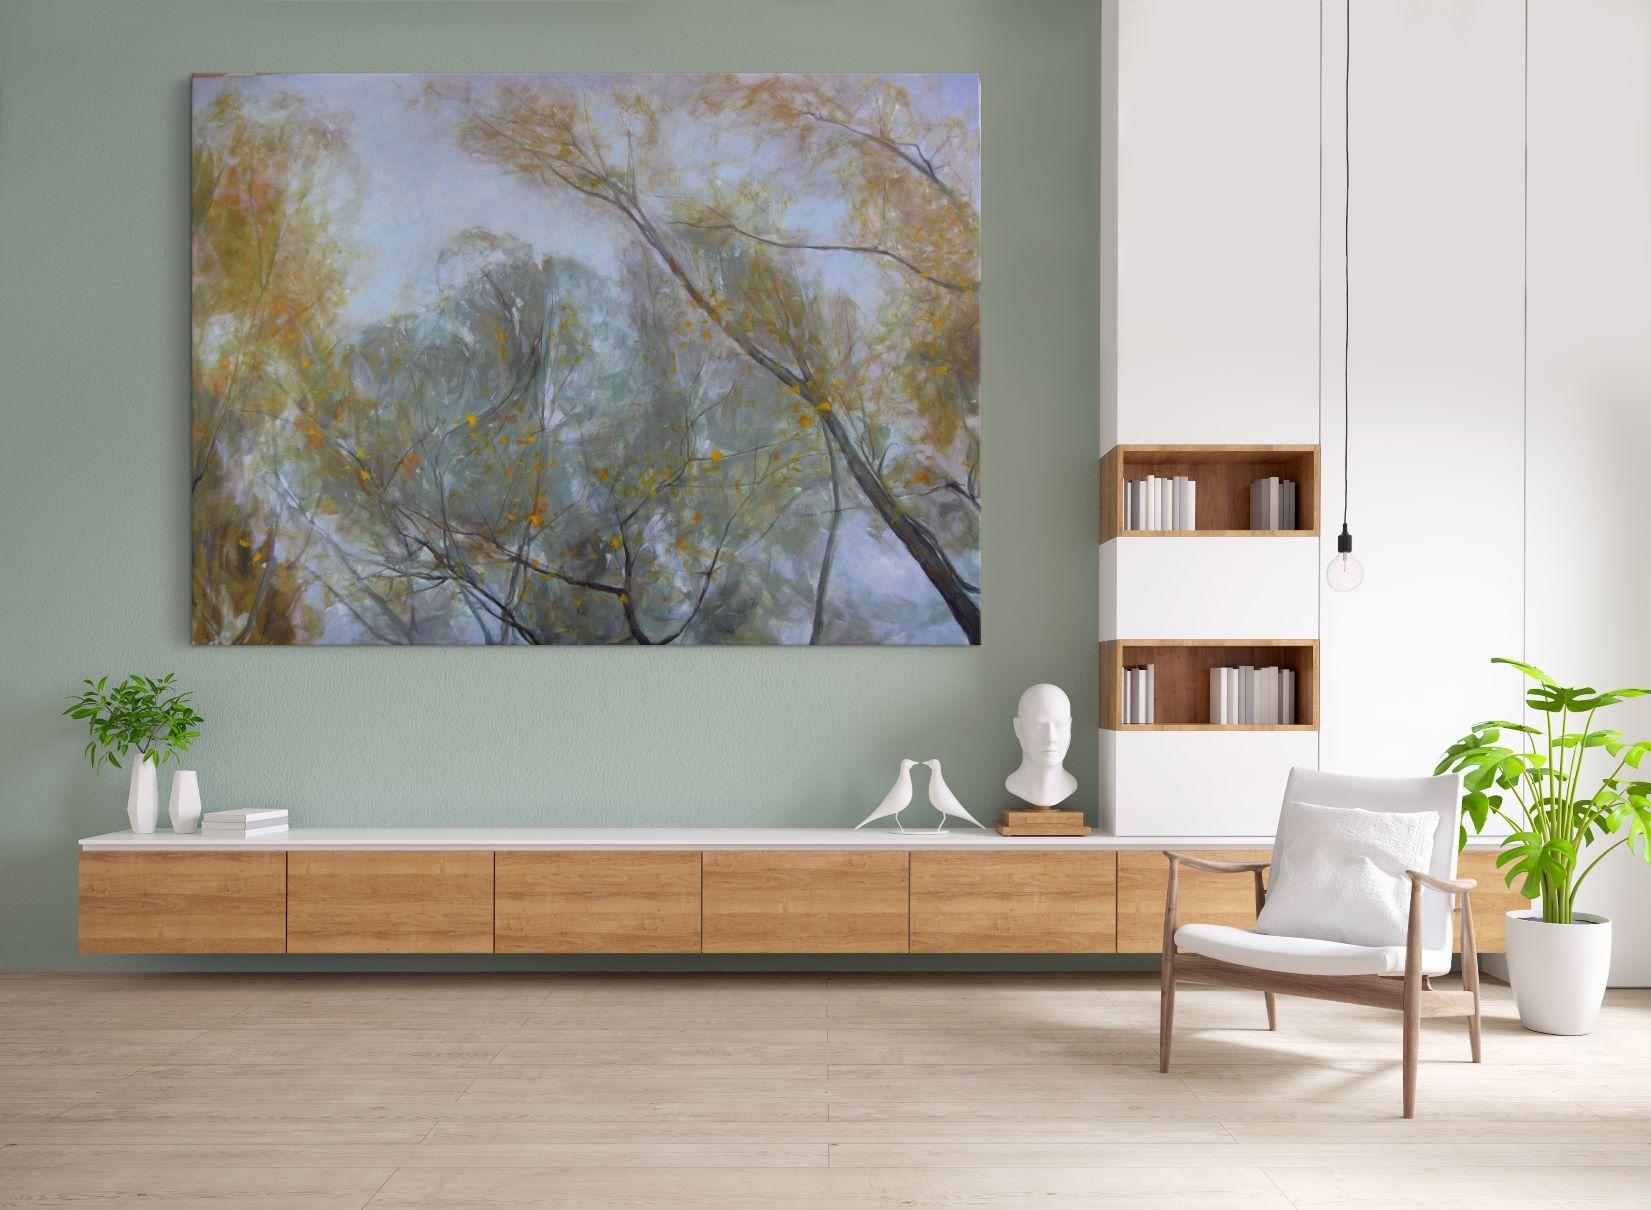 Aspens’ and Willows’ Branches in Autumn by V. de Sarrieu - landscape painting For Sale 1